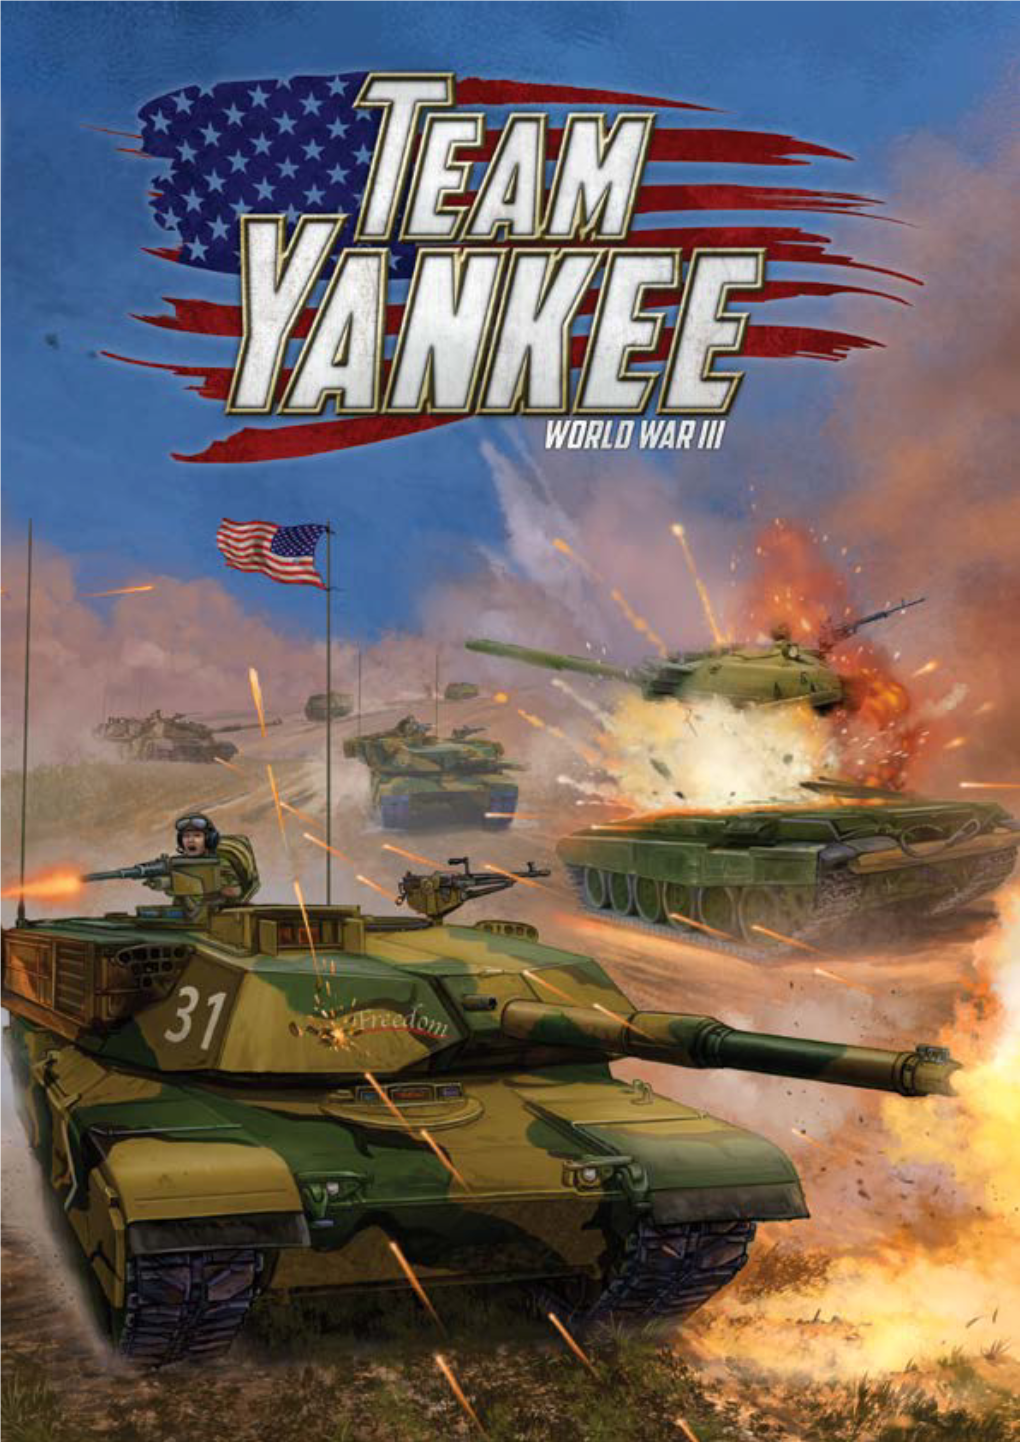 Team Yankee Novel, from Your Own If You Can Do Better Than Your Opponent Did